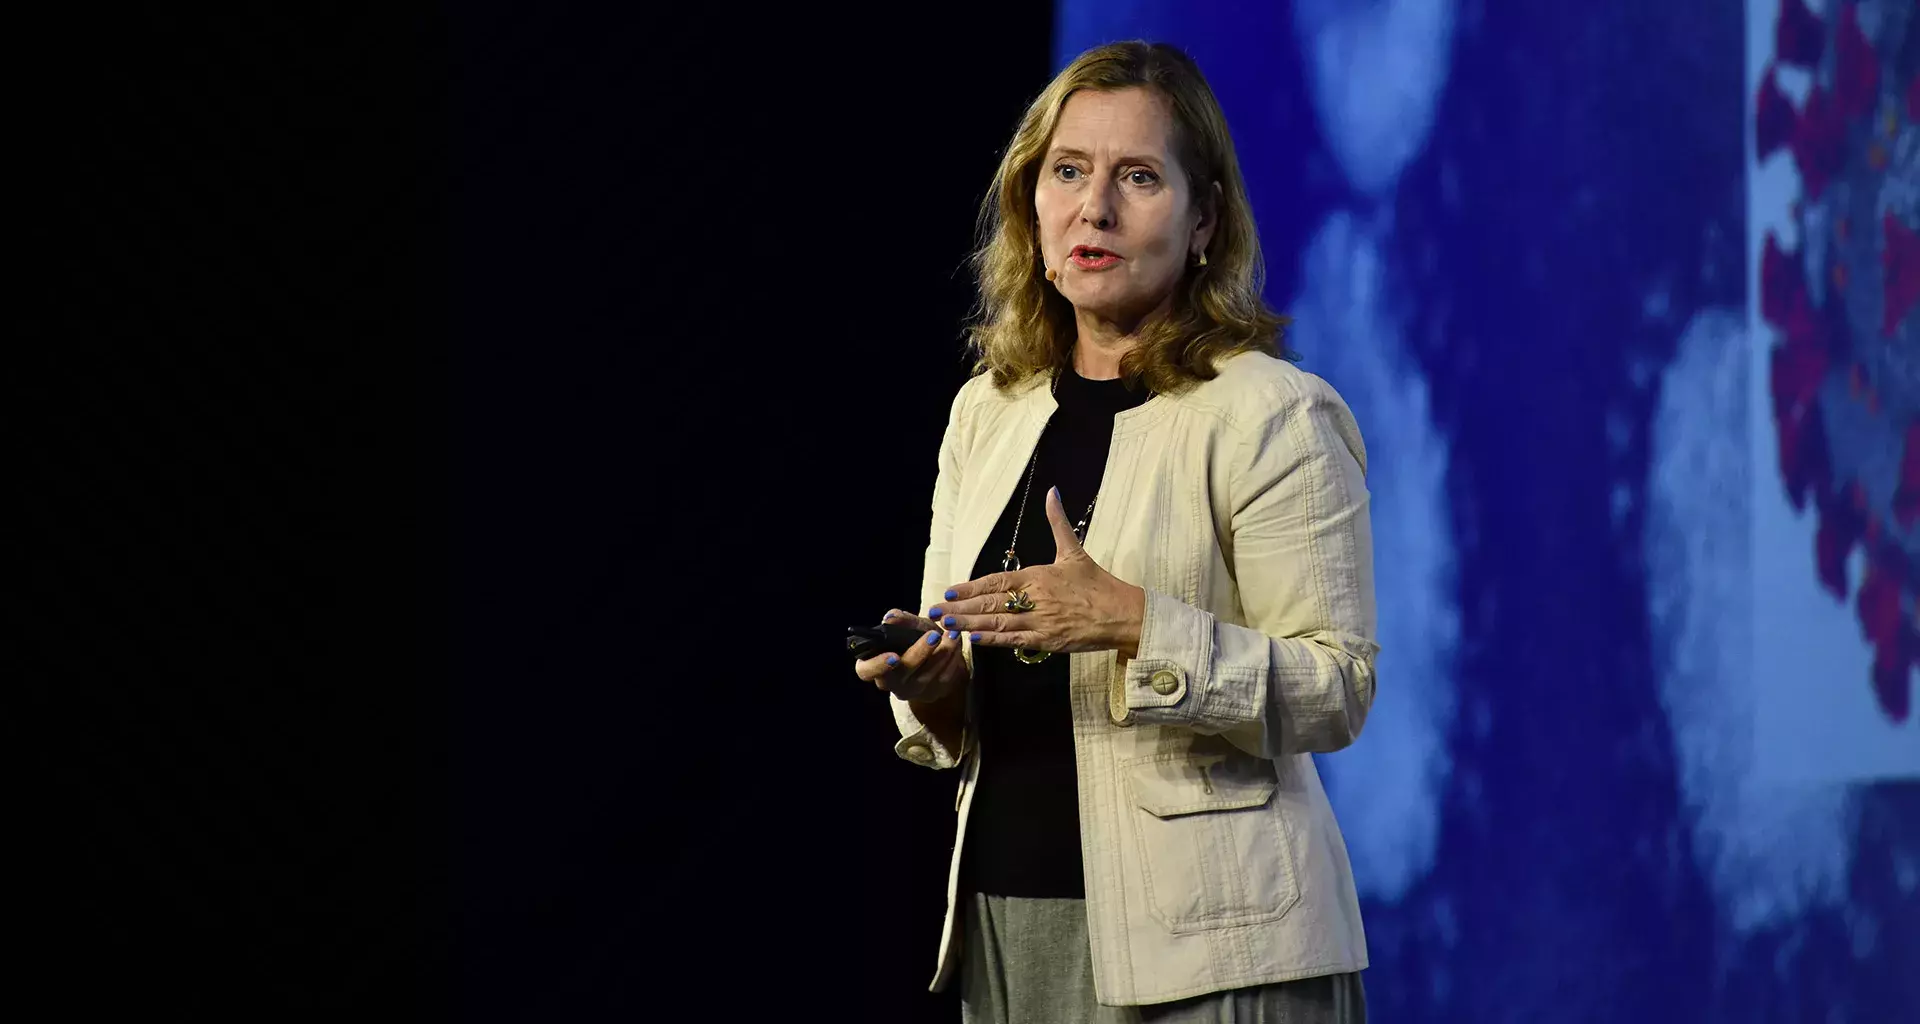 Design is an agent of change: Architect Paola Antonelli at Tec